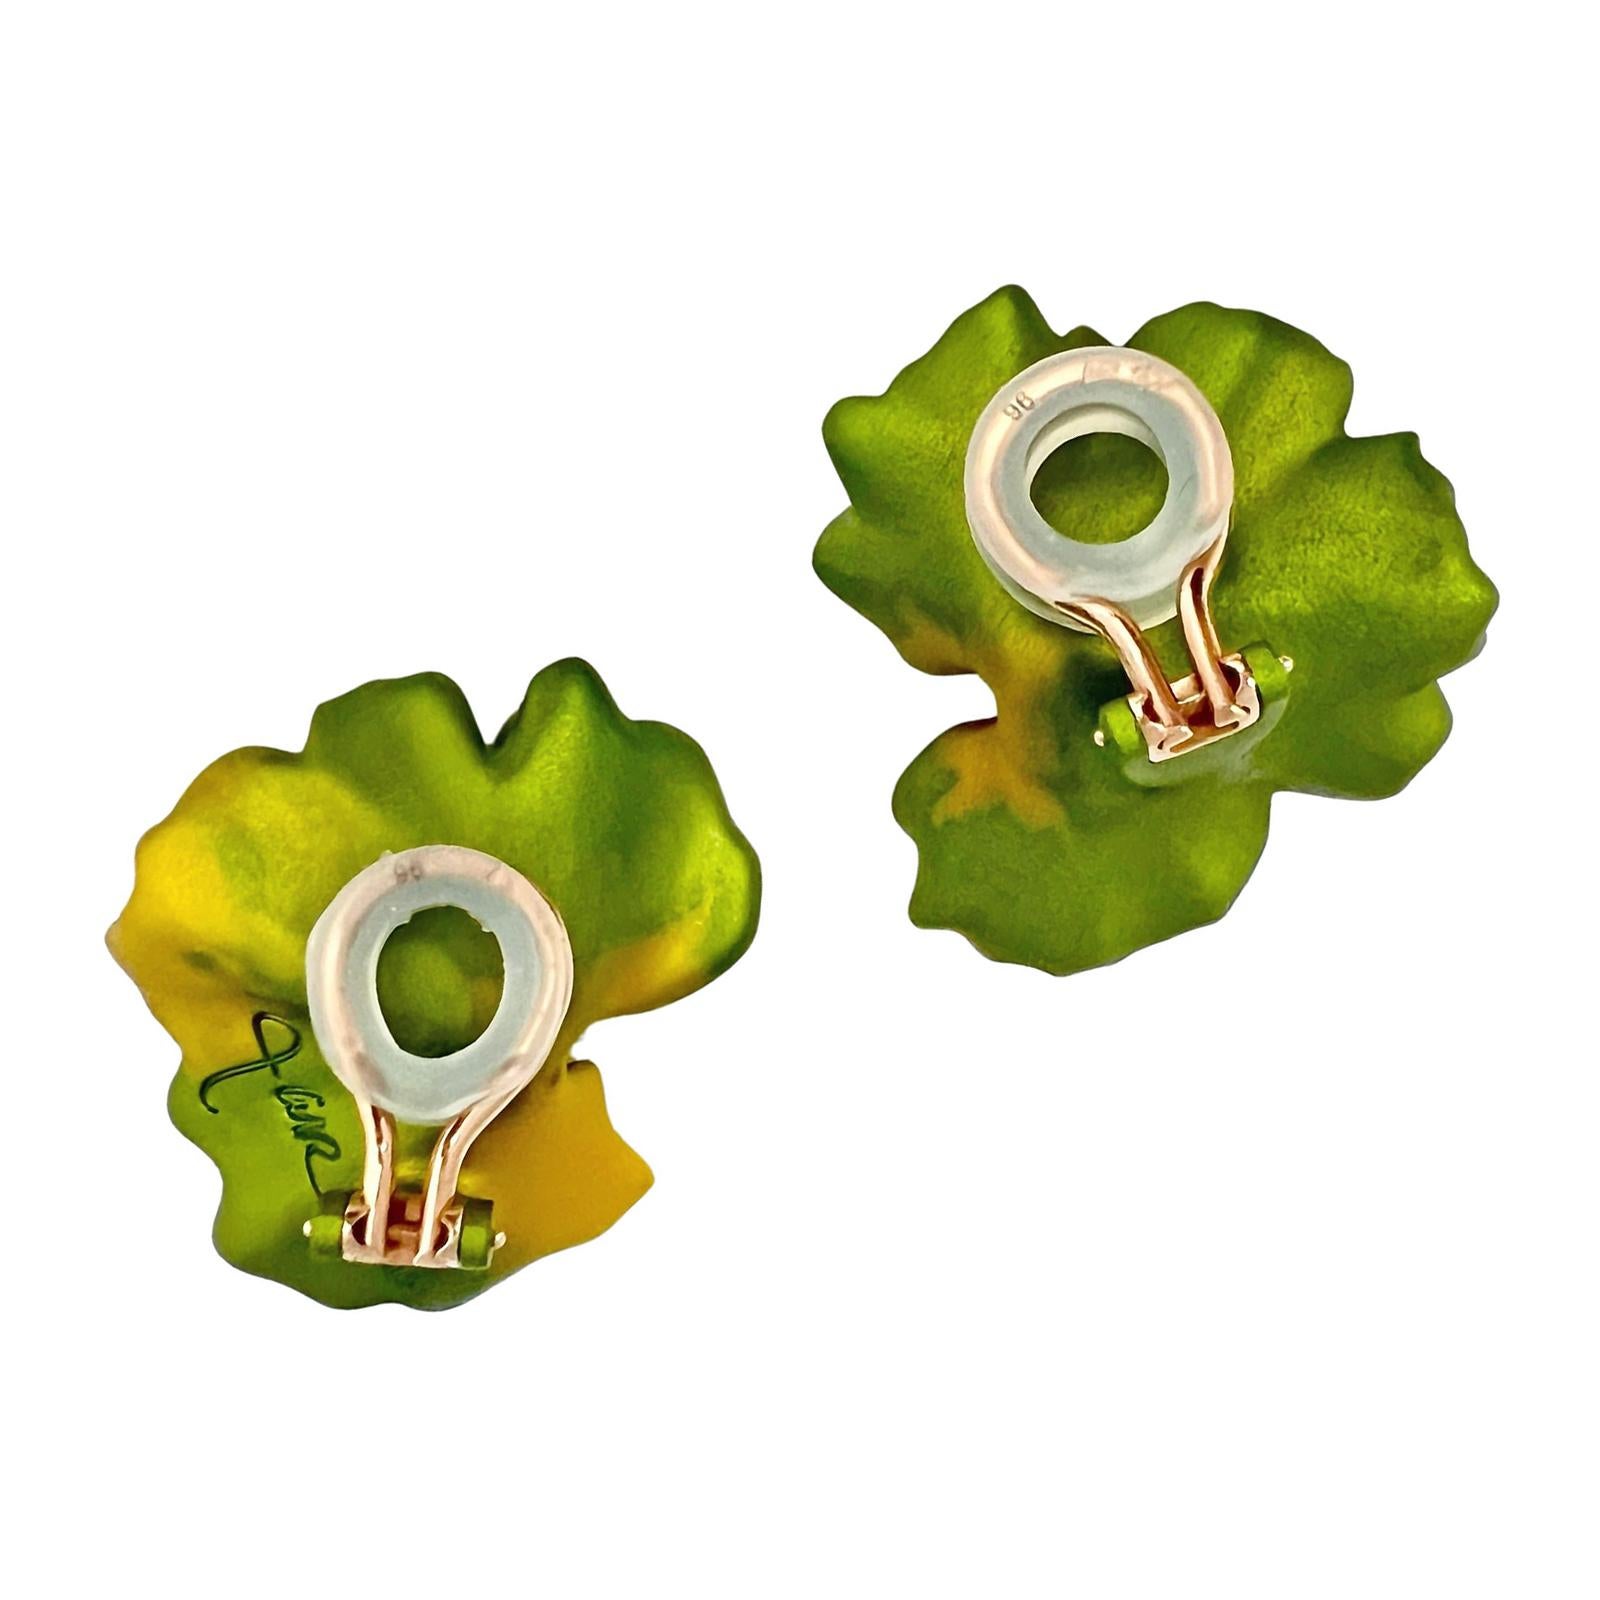 Geranium leaf clip earrings by Joel Arthur Rosenthal (JAR), Paris.  Elegantly designed in gilt aluminum to replicate the sun shining through summer leaves with graduating tones of green and yellowish-green.  Secured by 18k rose gold omega-style clip